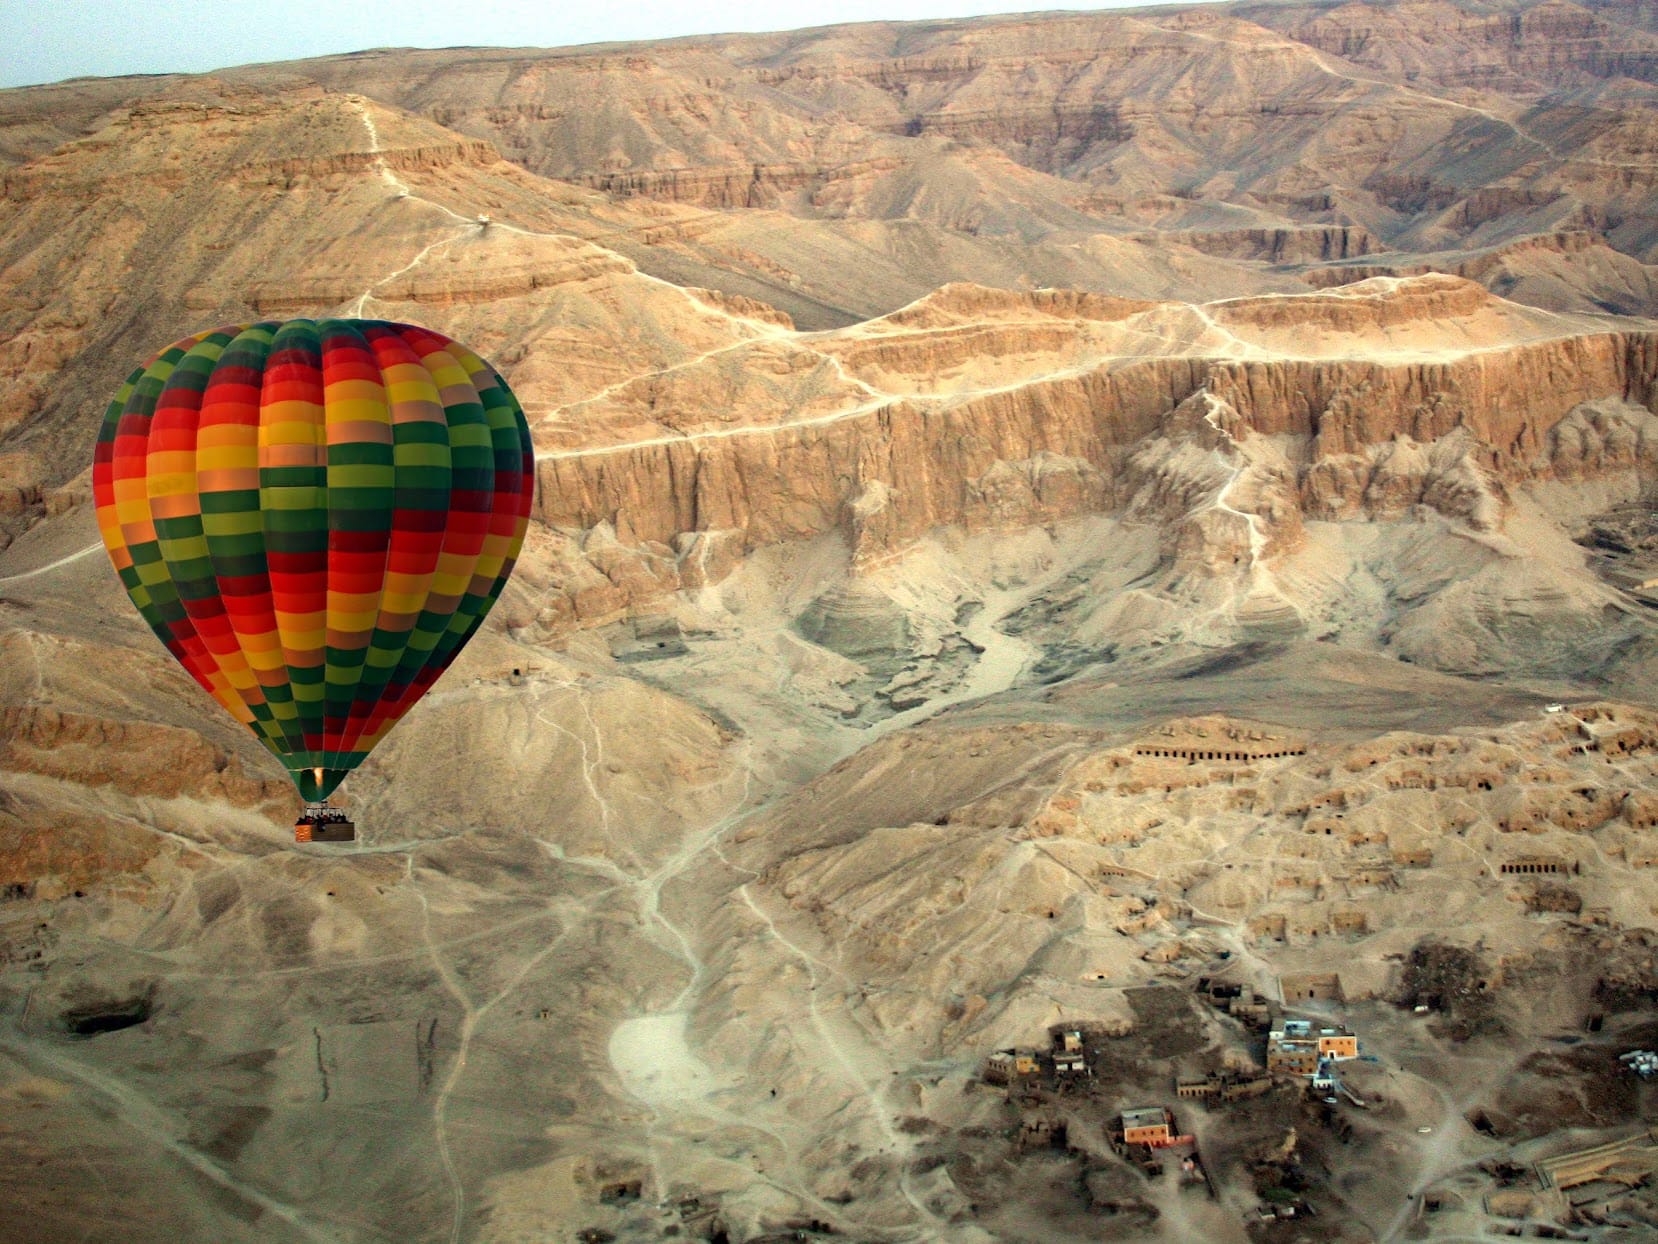 Hot Air Balloon Over the Valley of the Kings